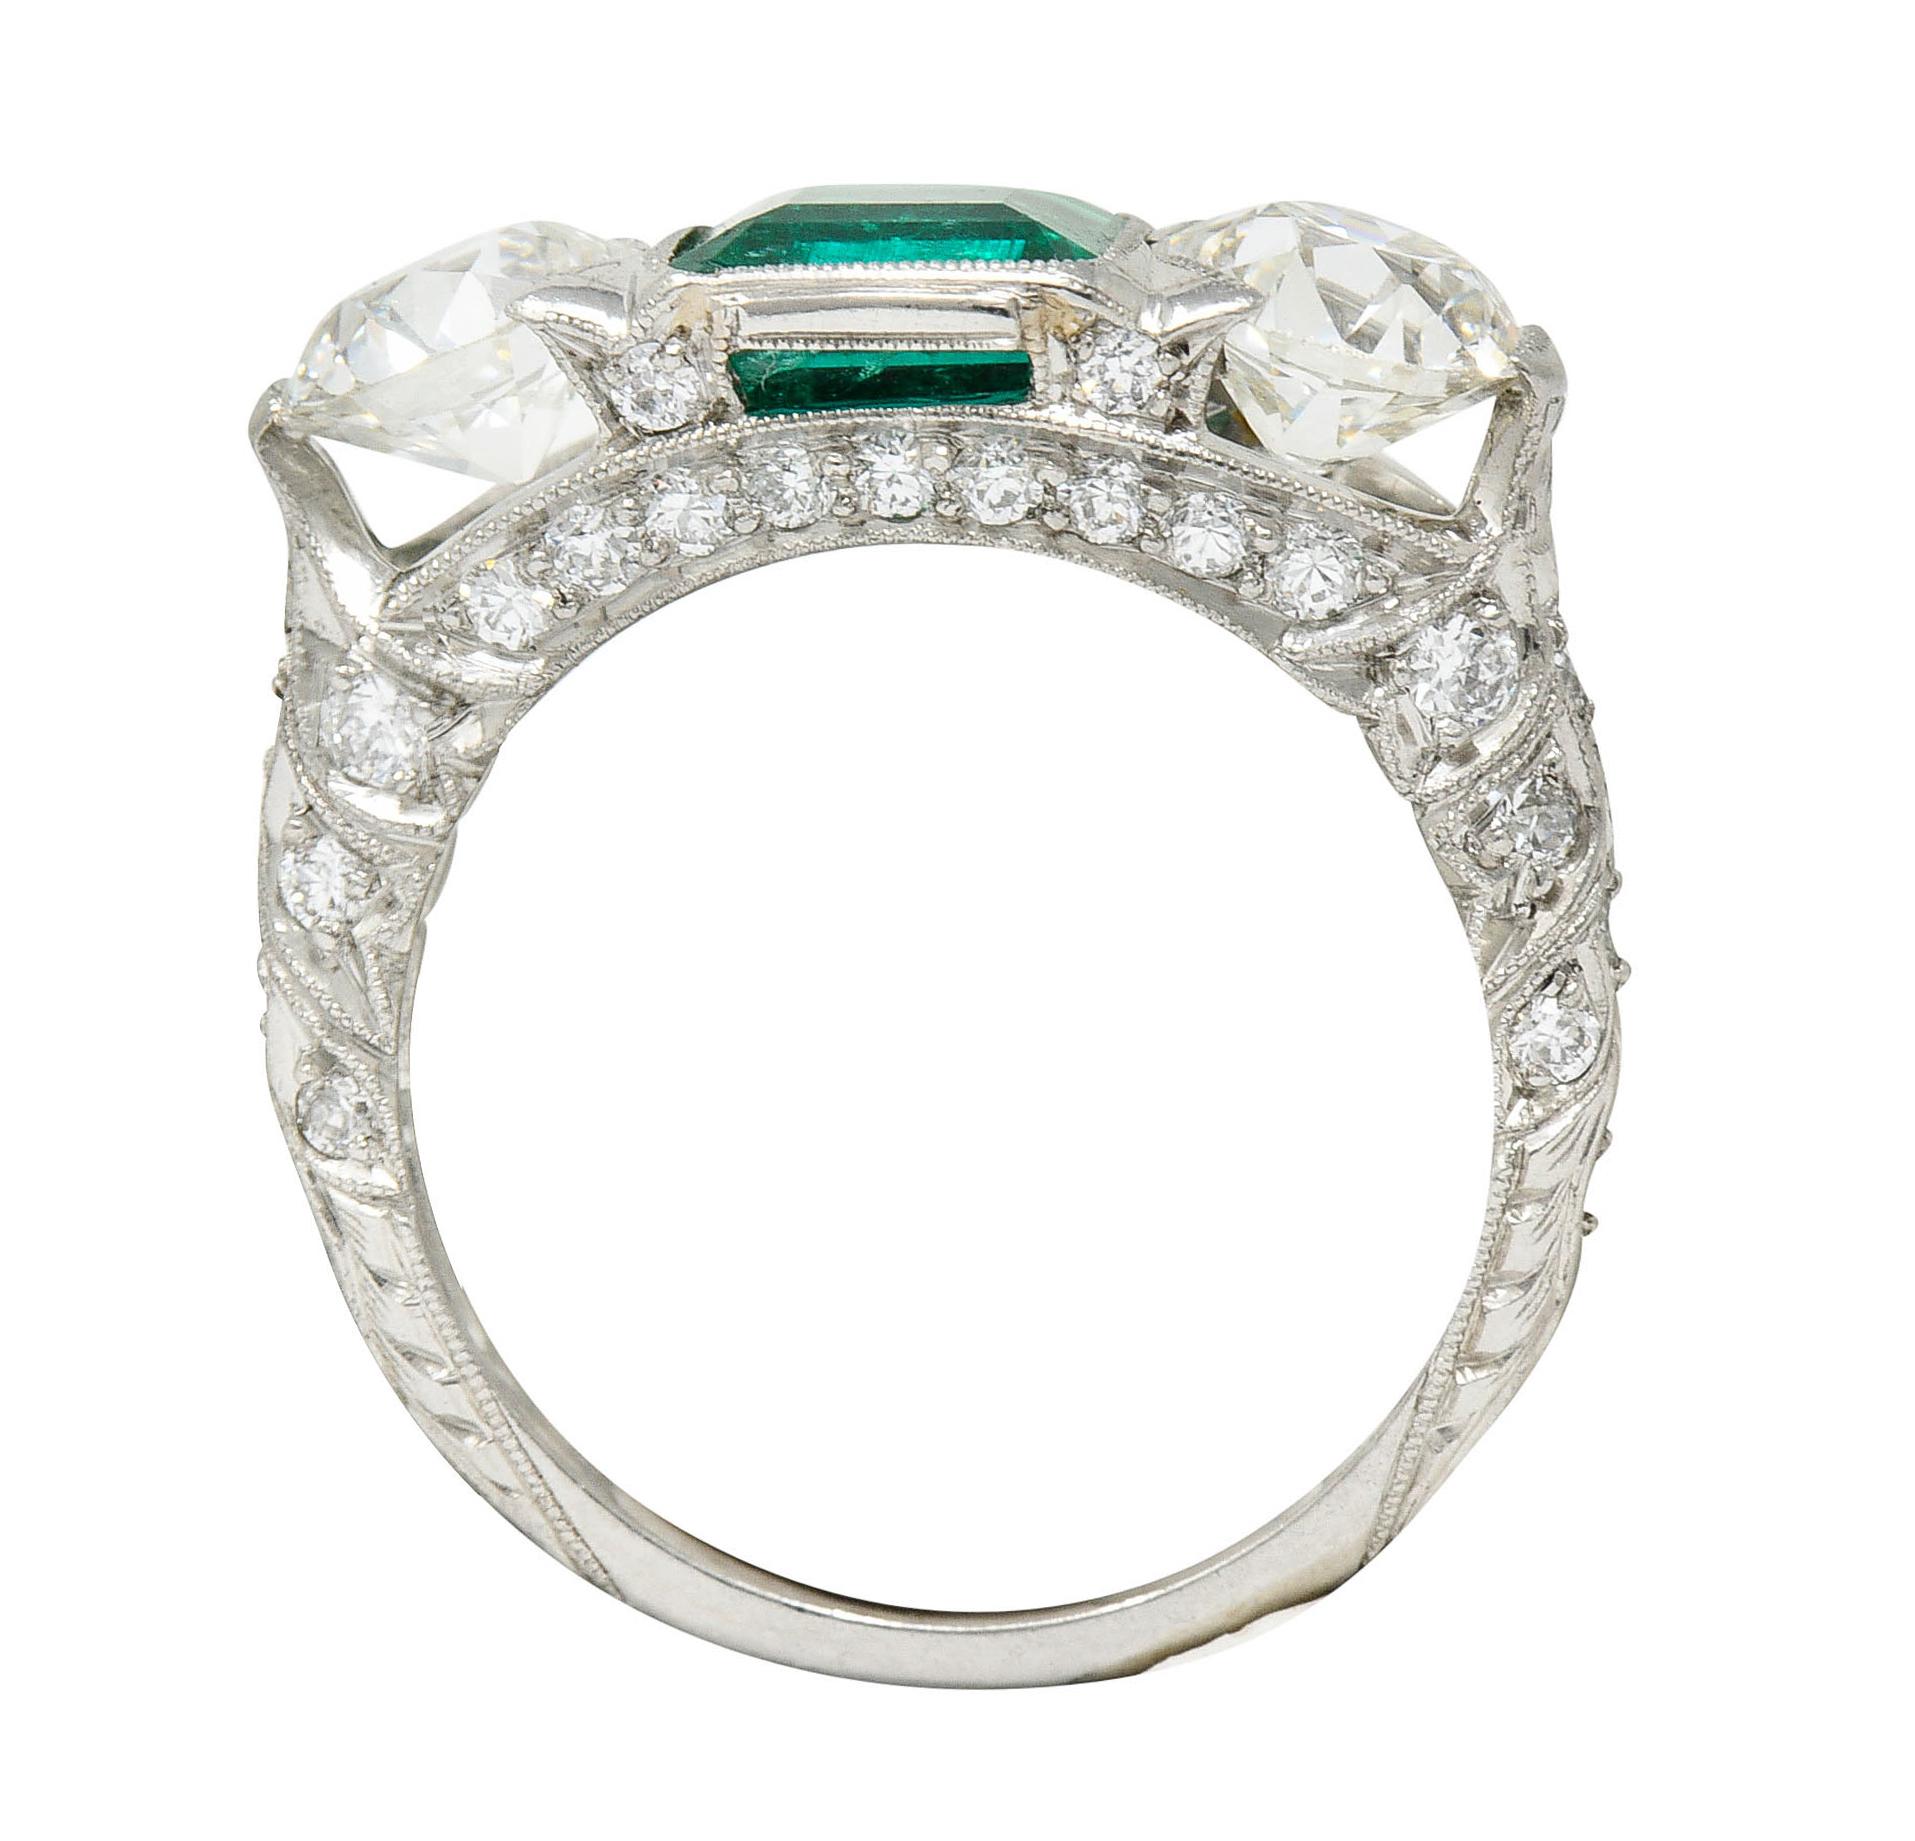 Designed as a three stone ring with ribbon motif shoulders and milgrain edges

Centering a square cut emerald weighing approximately 1.20 carat - transparent with bright green color

Flanked by two old European cut diamonds weighing in total